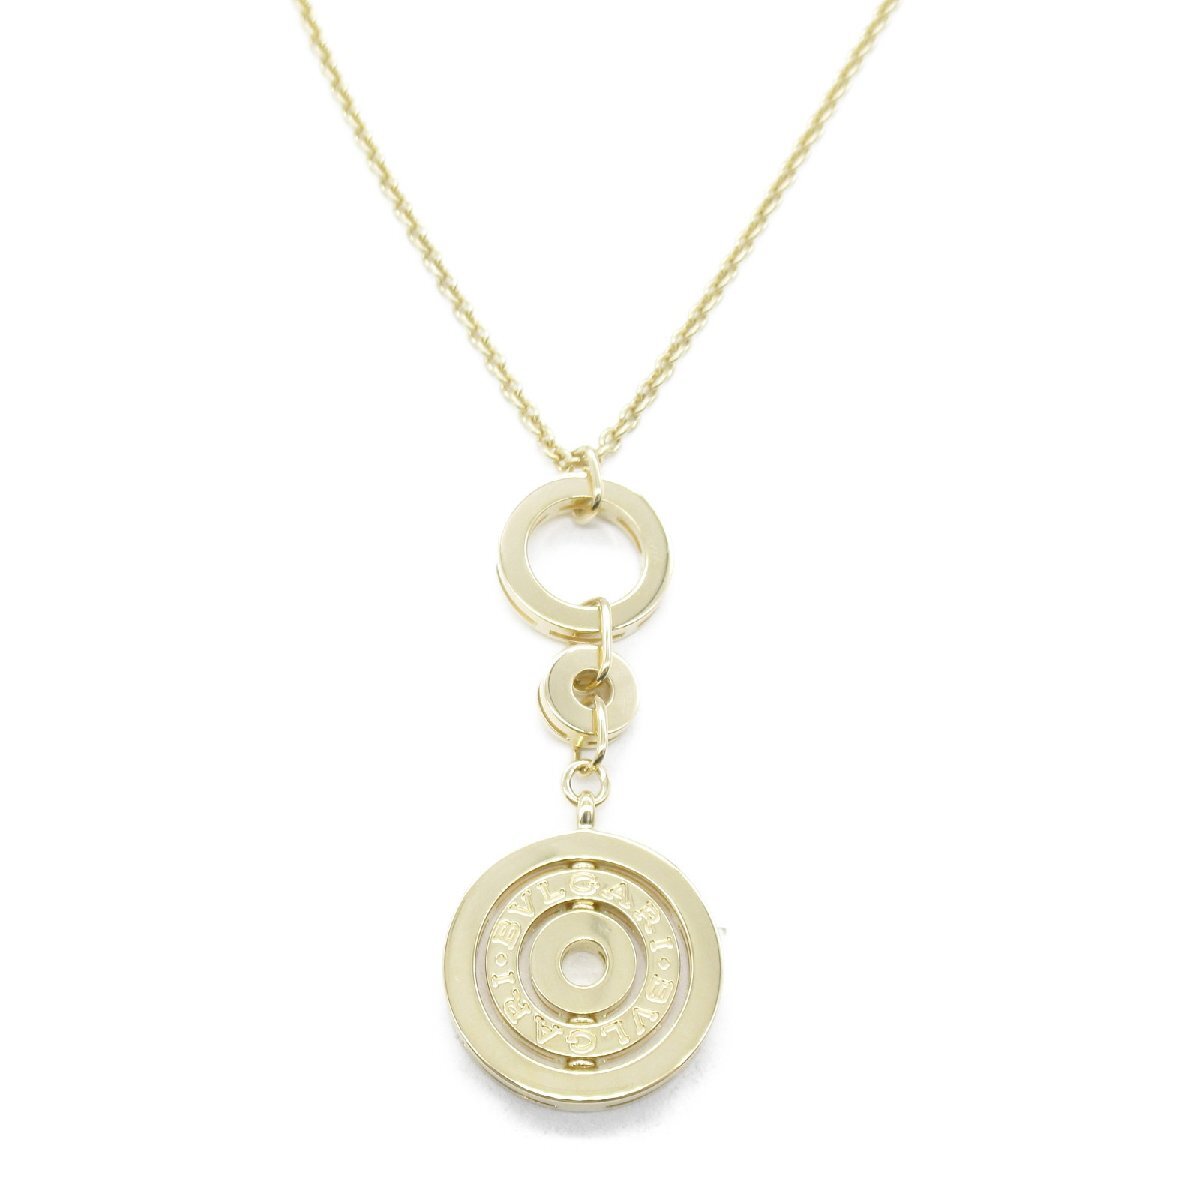  BVLGARY Astra -re necklace brand off BVLGARI K18( yellow gold ) necklace 750YG used men's lady's 